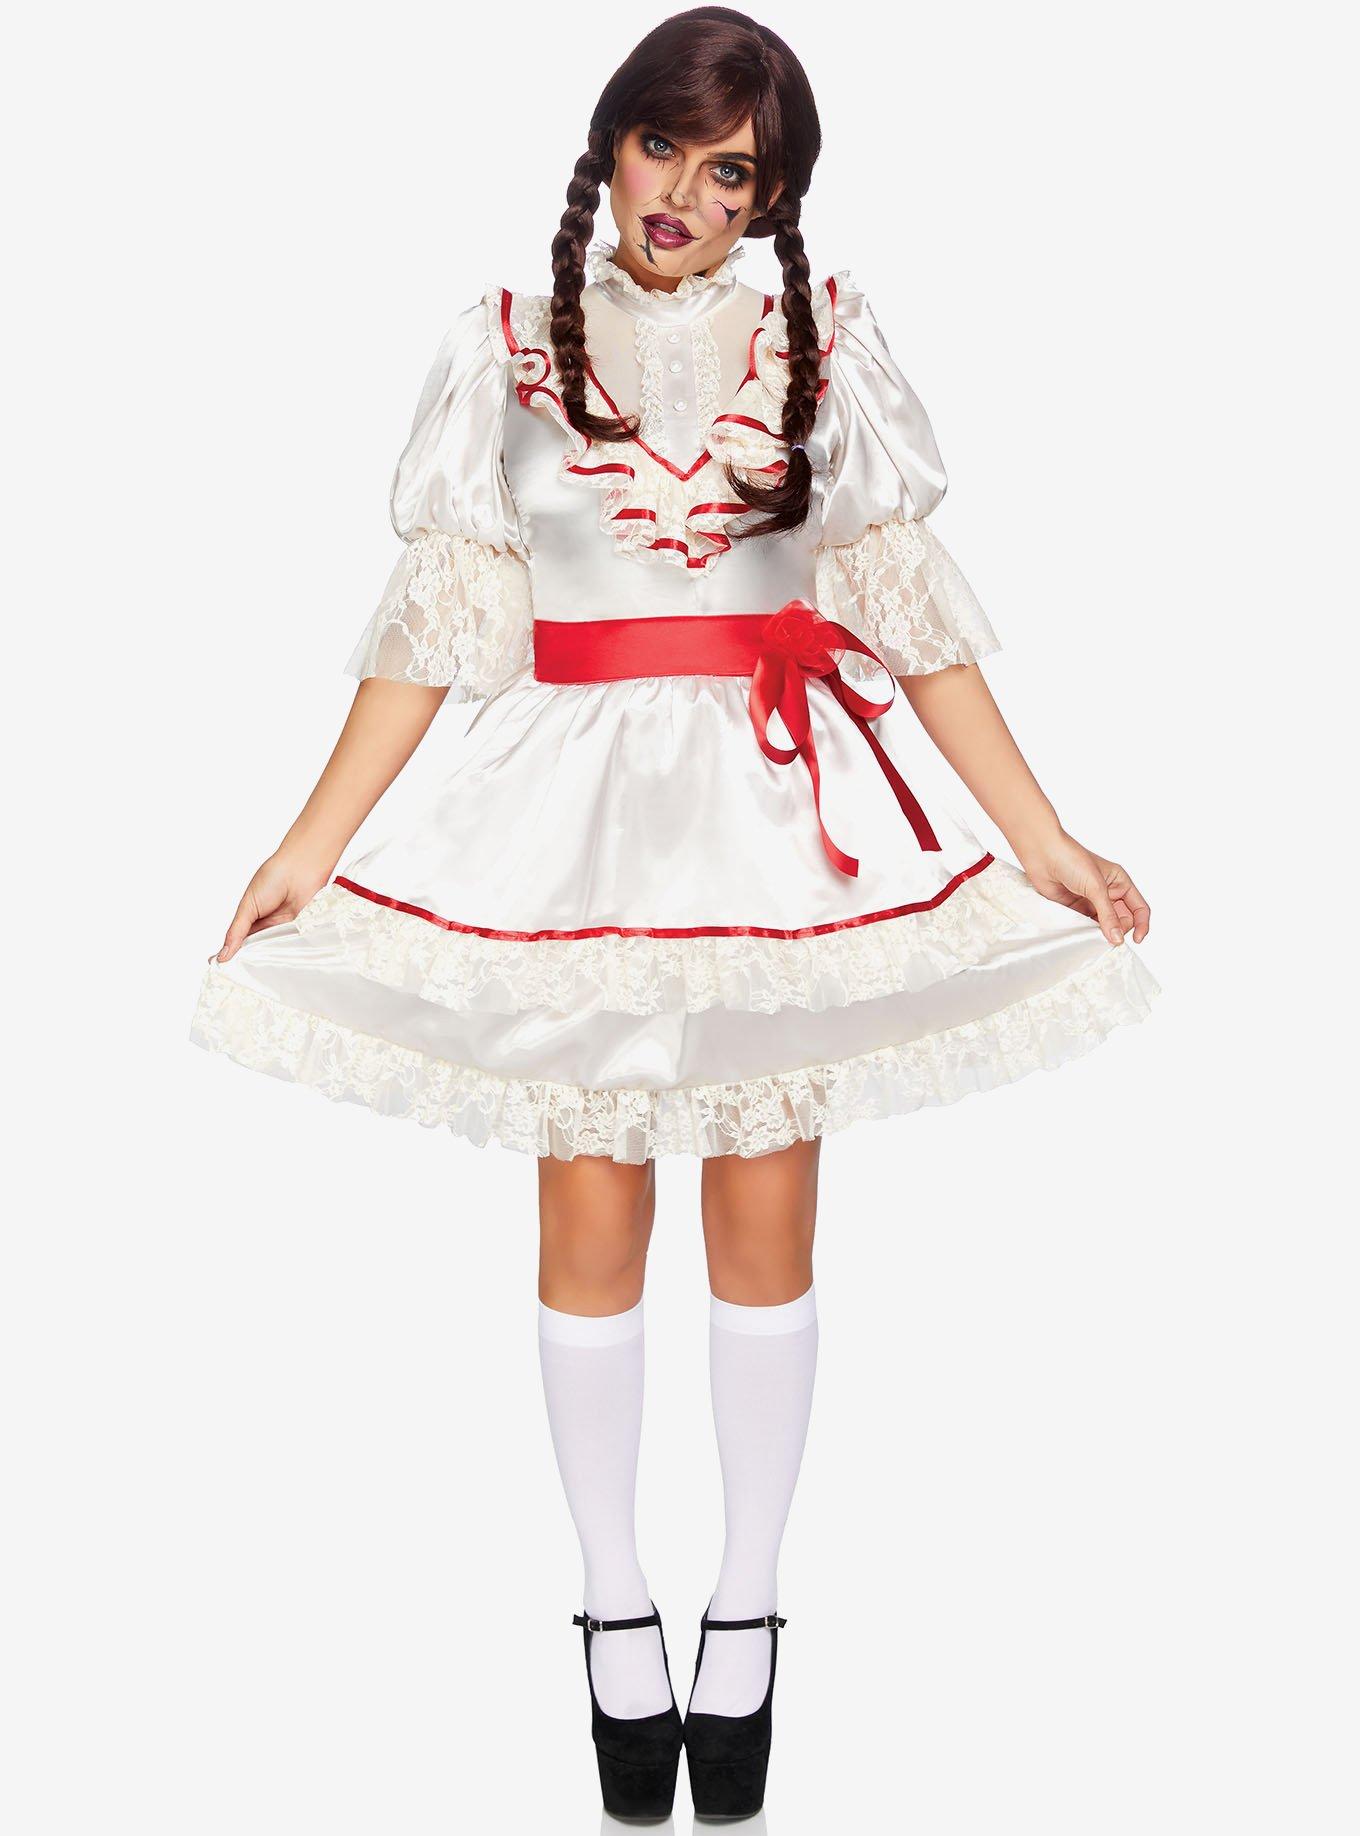 Hot Topic Haunted Doll Costume | CoolSprings Galleria